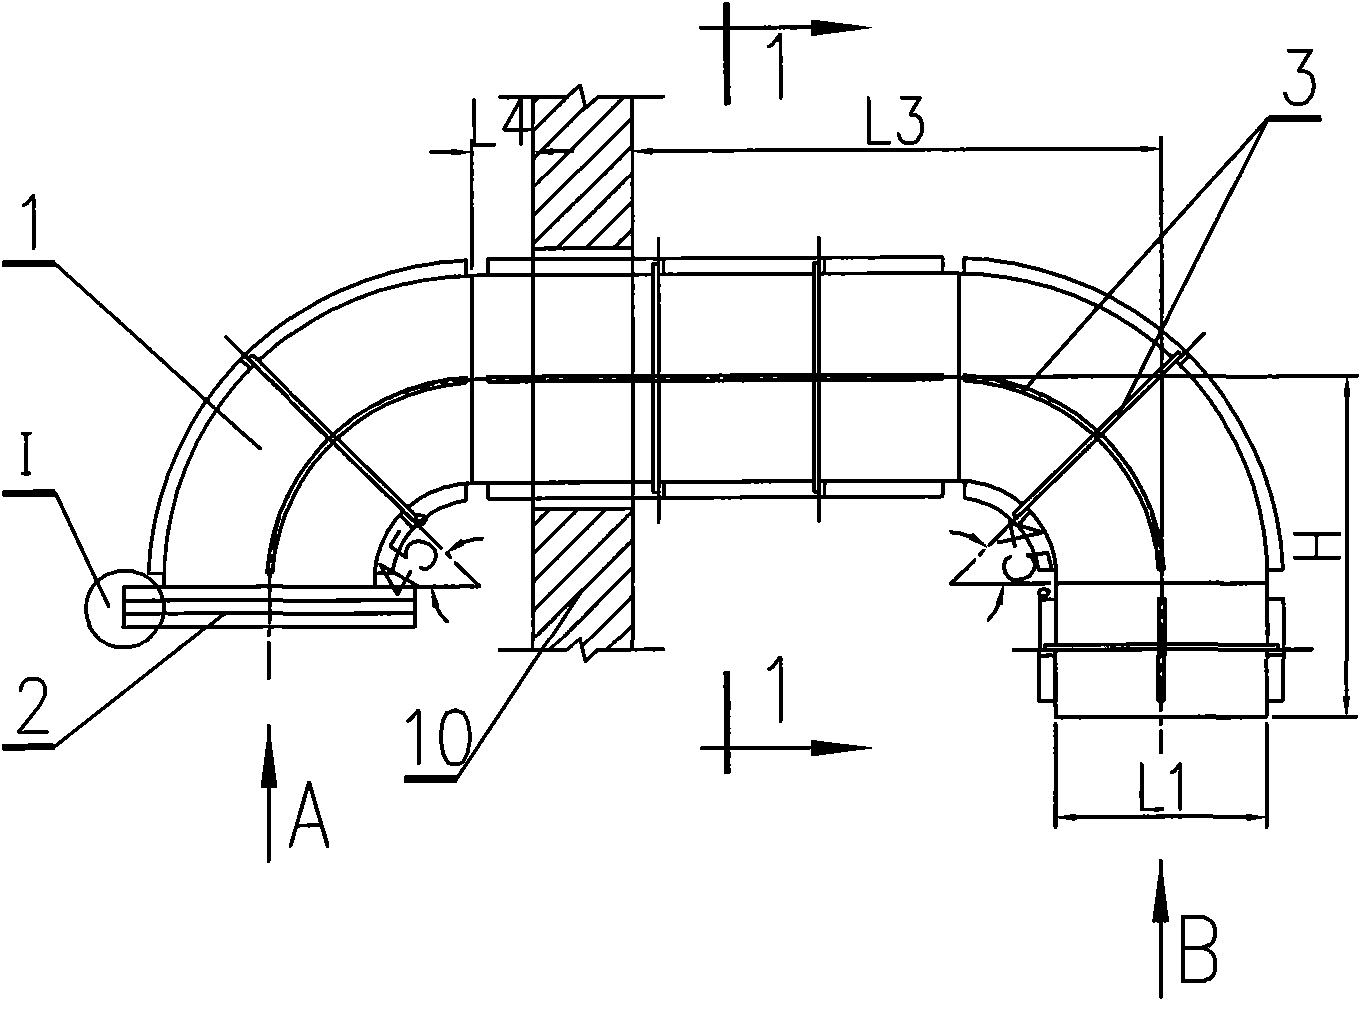 Air suction device for an air compressor